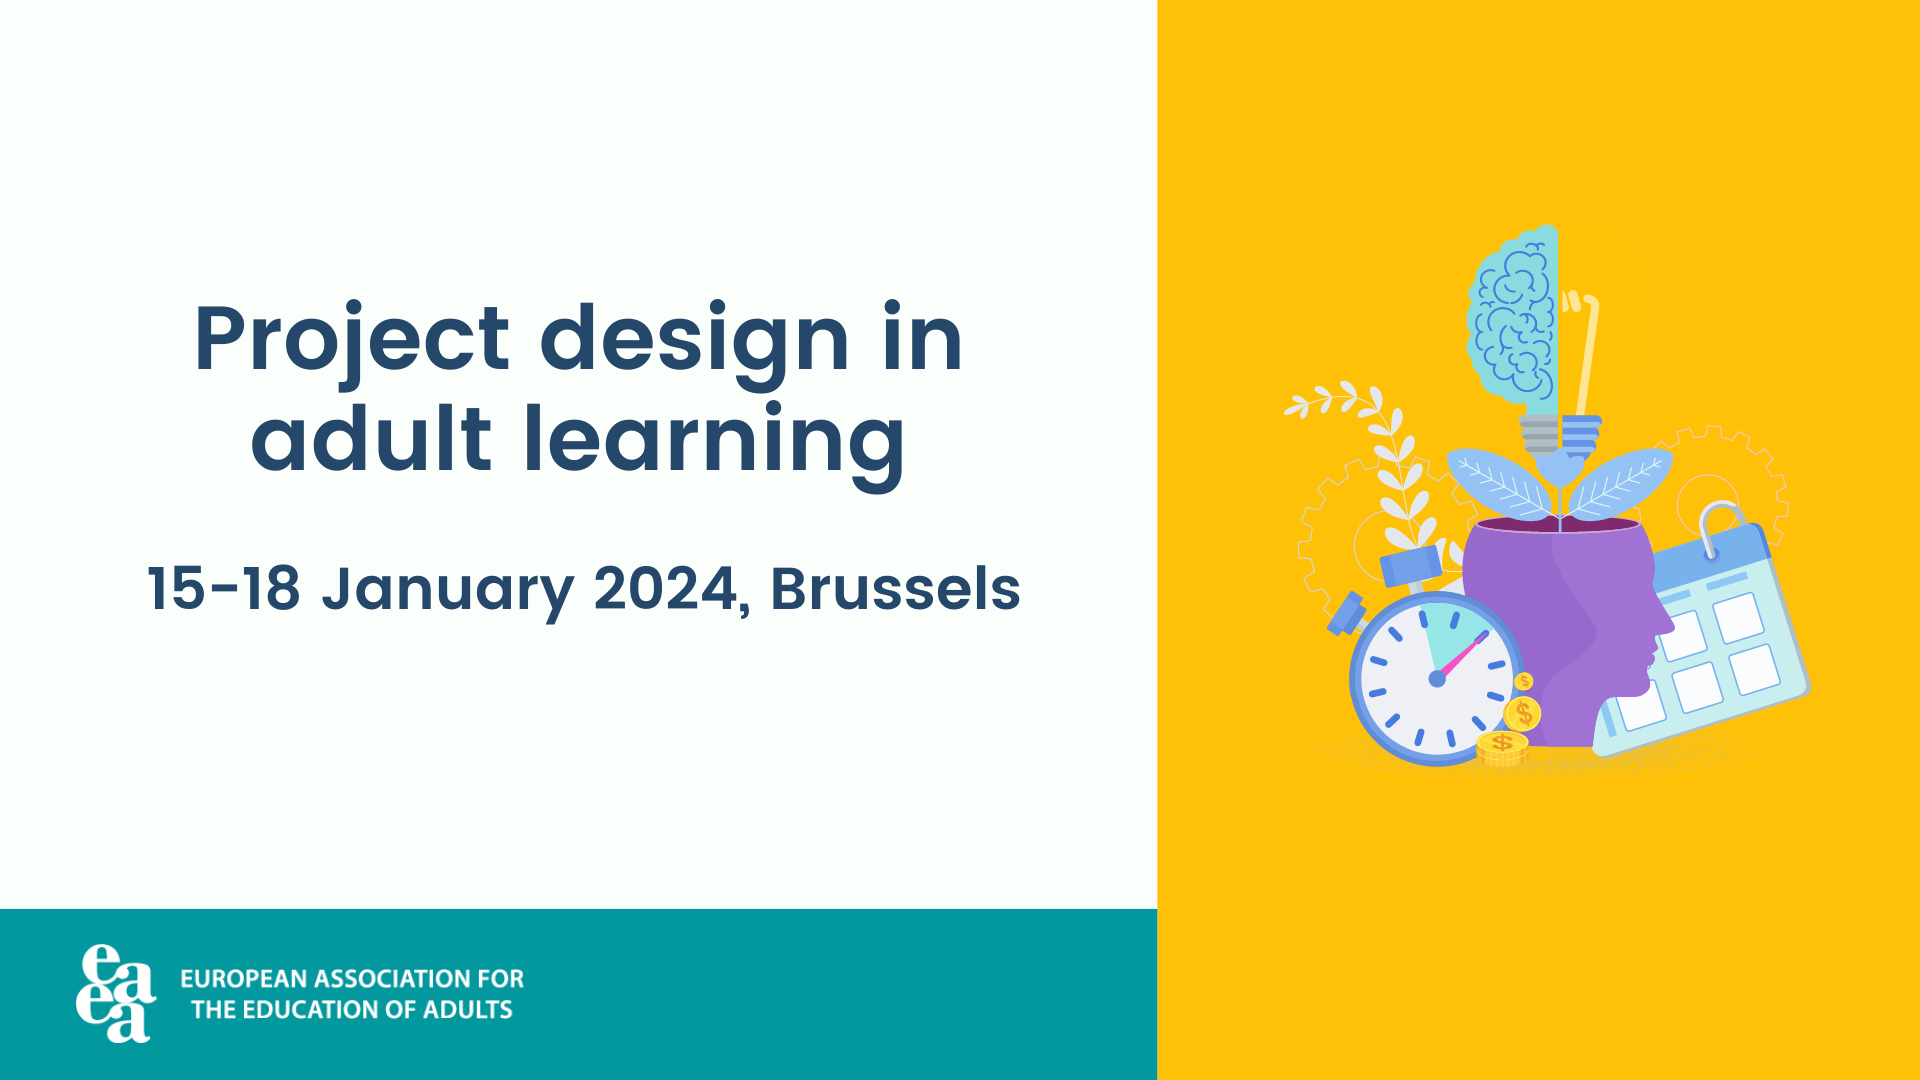 A visual banner with a colorful illustration on the right side, on the left the text says: Project design in adult learning 15-18th of January 2024 in Brussels.